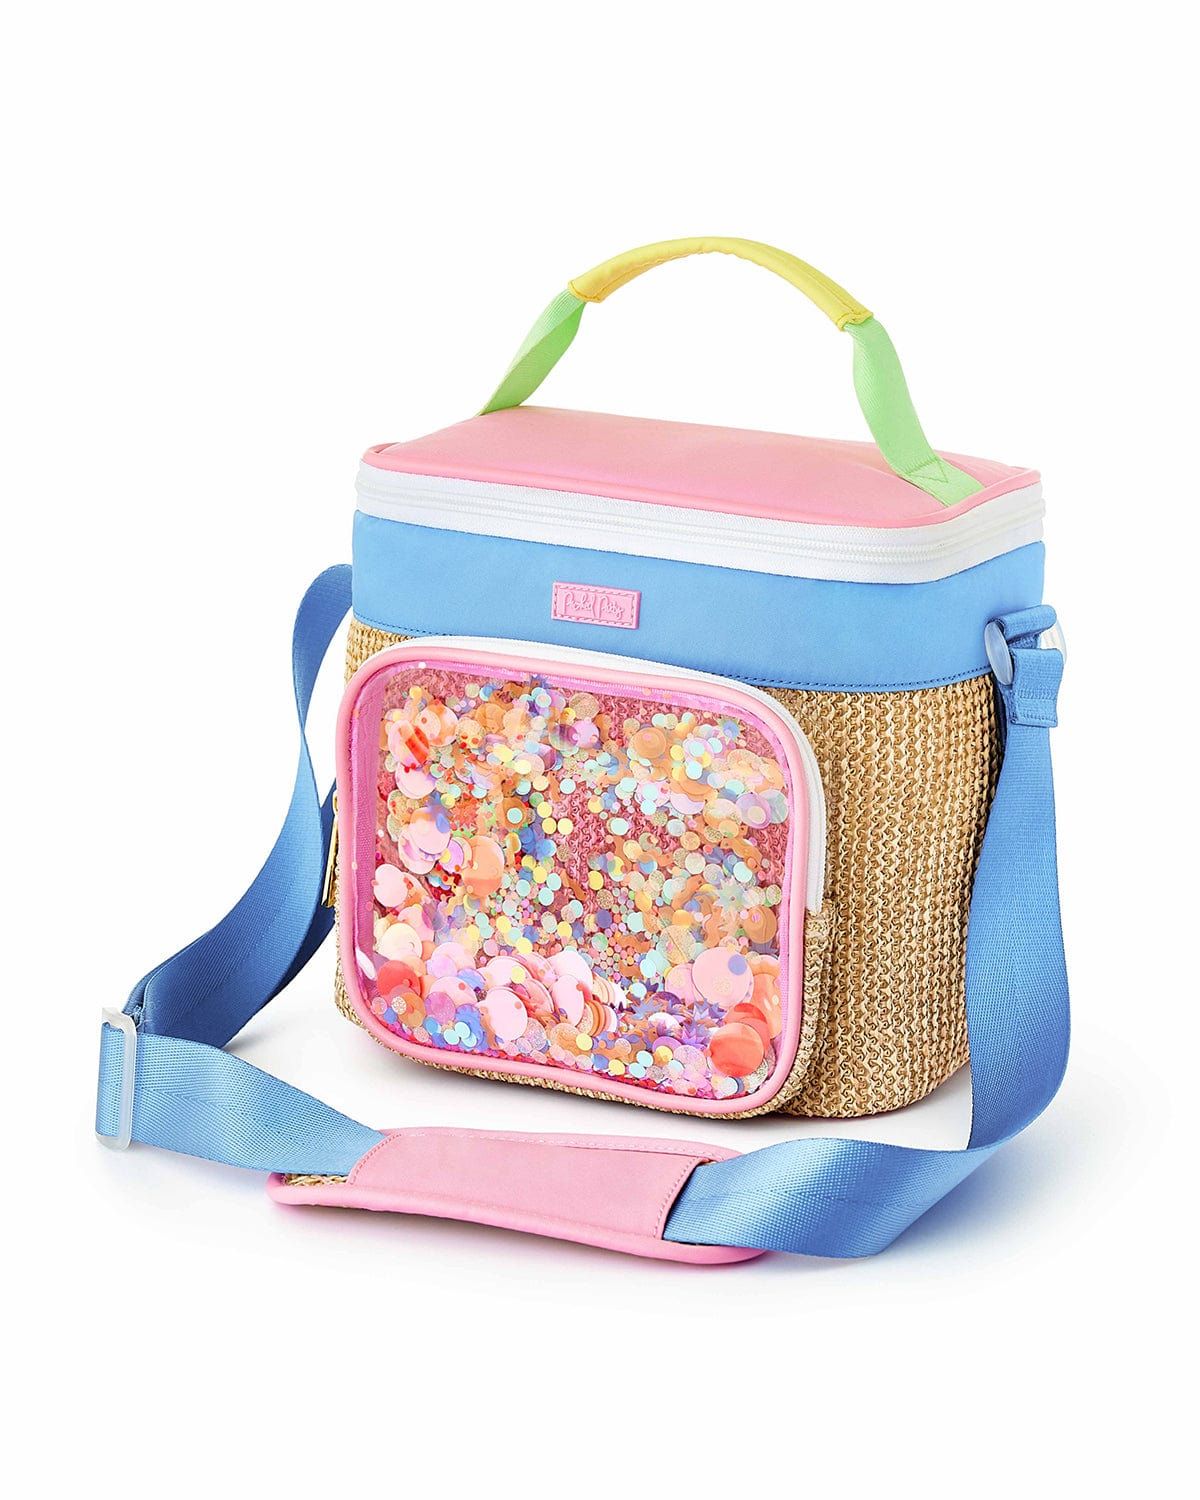 Bring On The Fun Insulated Confetti Cooler Bag | Packed Party